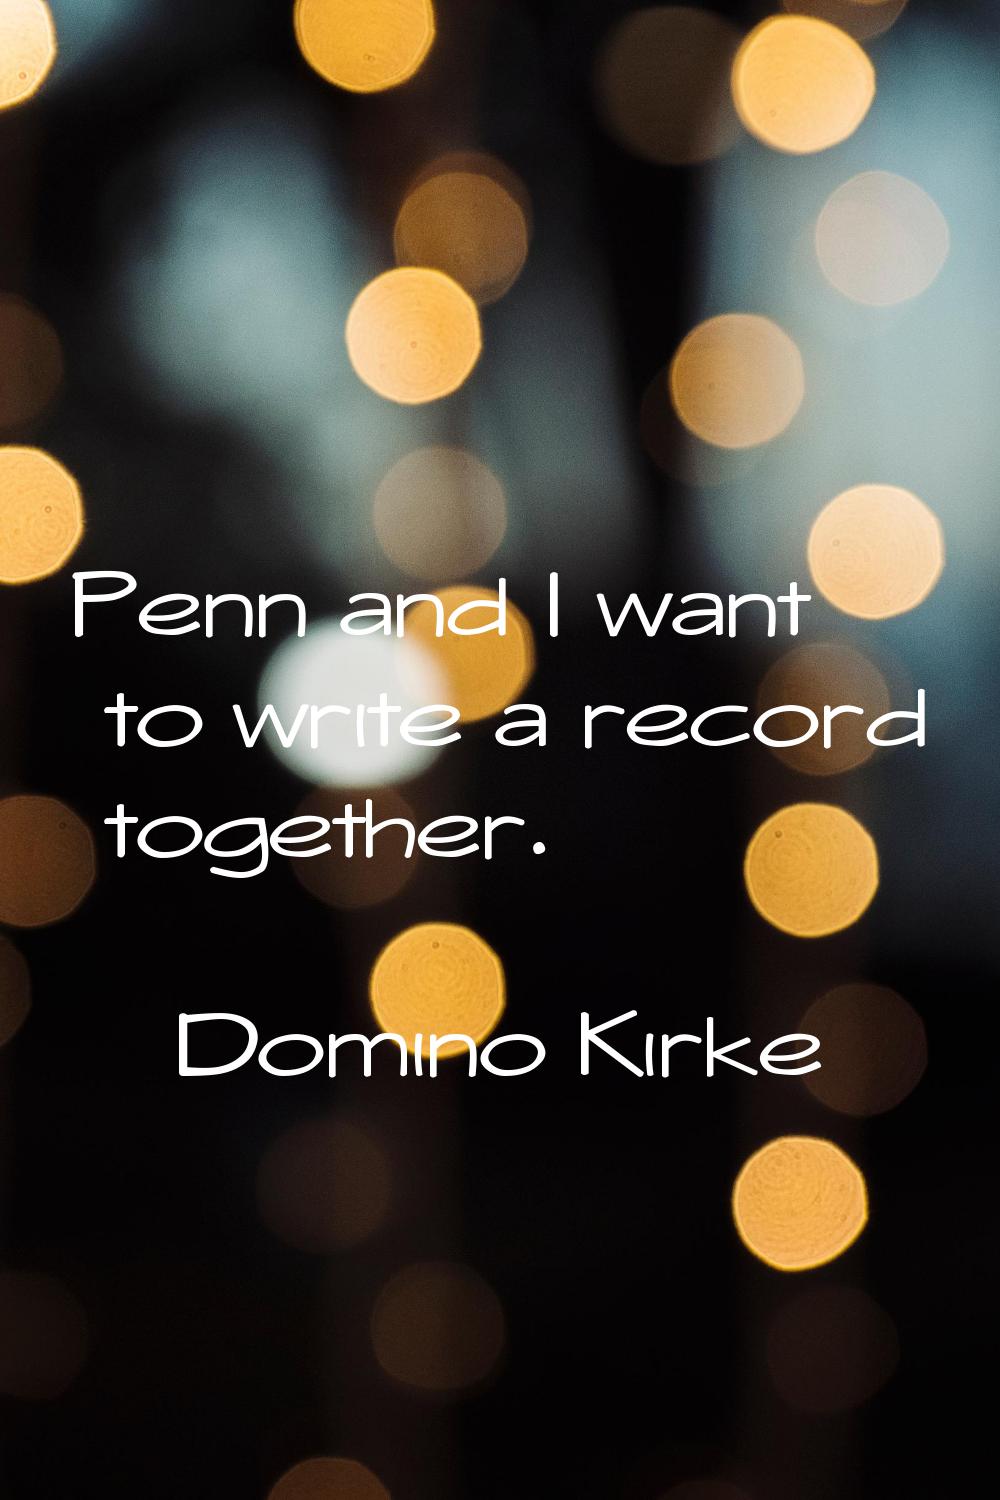 Penn and I want to write a record together.